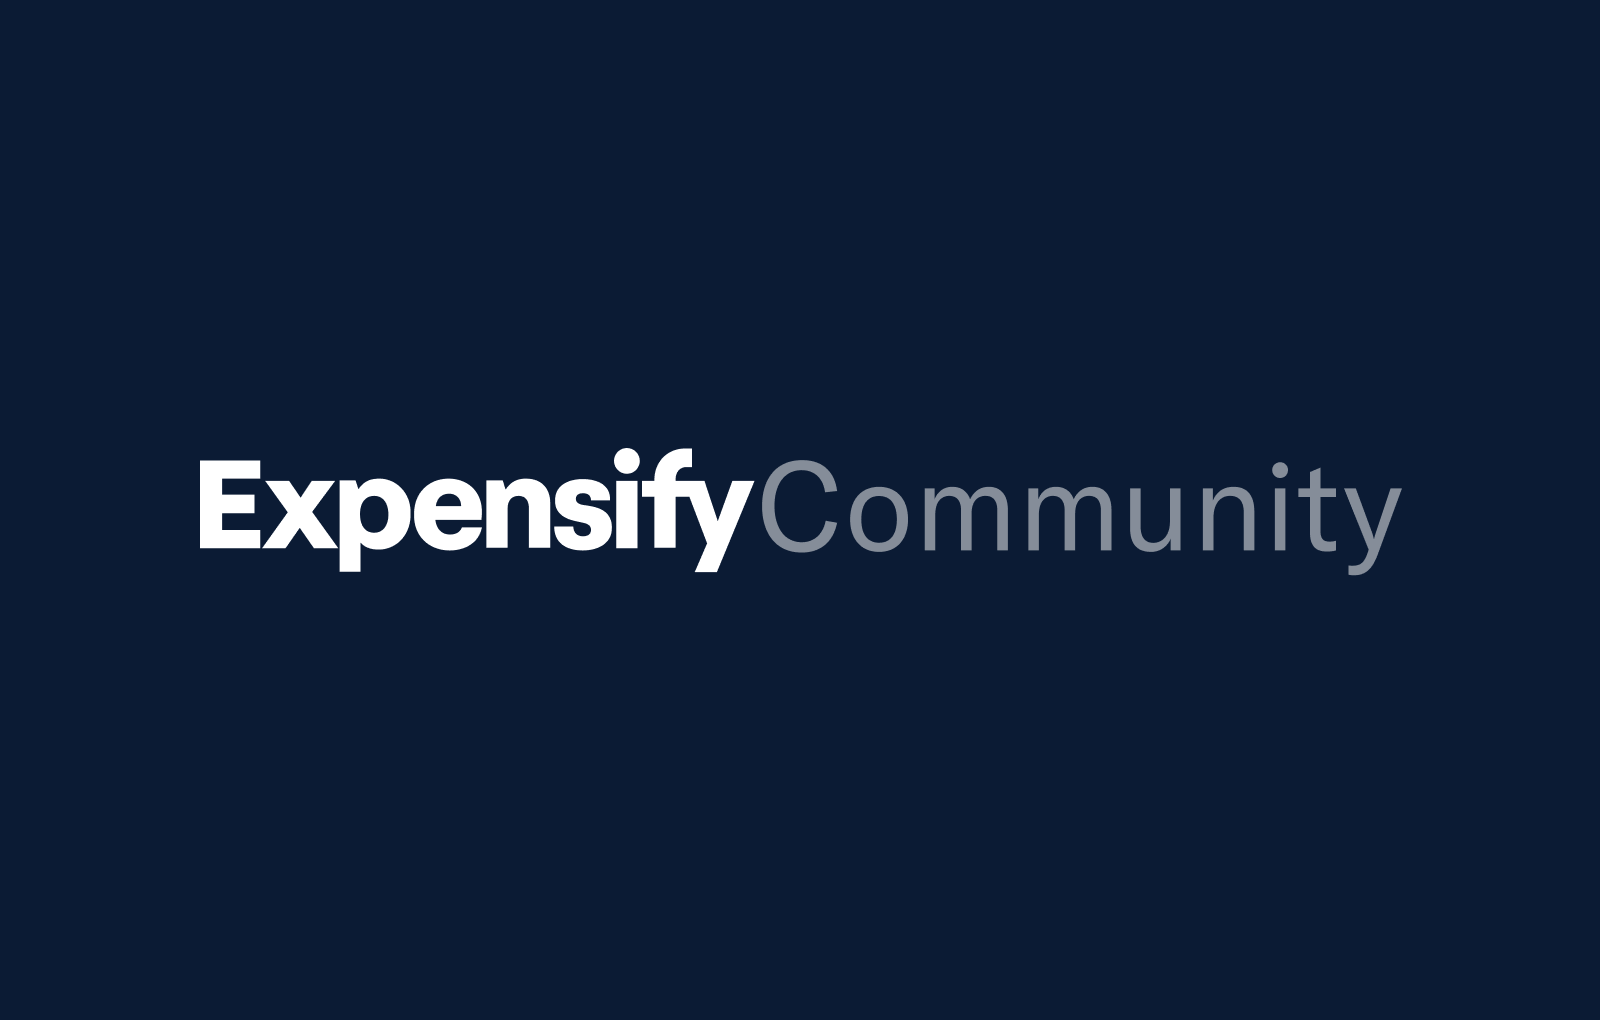 How do I CoMmUnicate with QuickBooks EnTerPrise Support? {1} 888 “960” 5414 “???????!!! — Important Notice: After July 31, 2024, the Expensify community will not longer be available. Help docs and resources can be found on help.expensify.com and you can message Concierge with any additional questions.